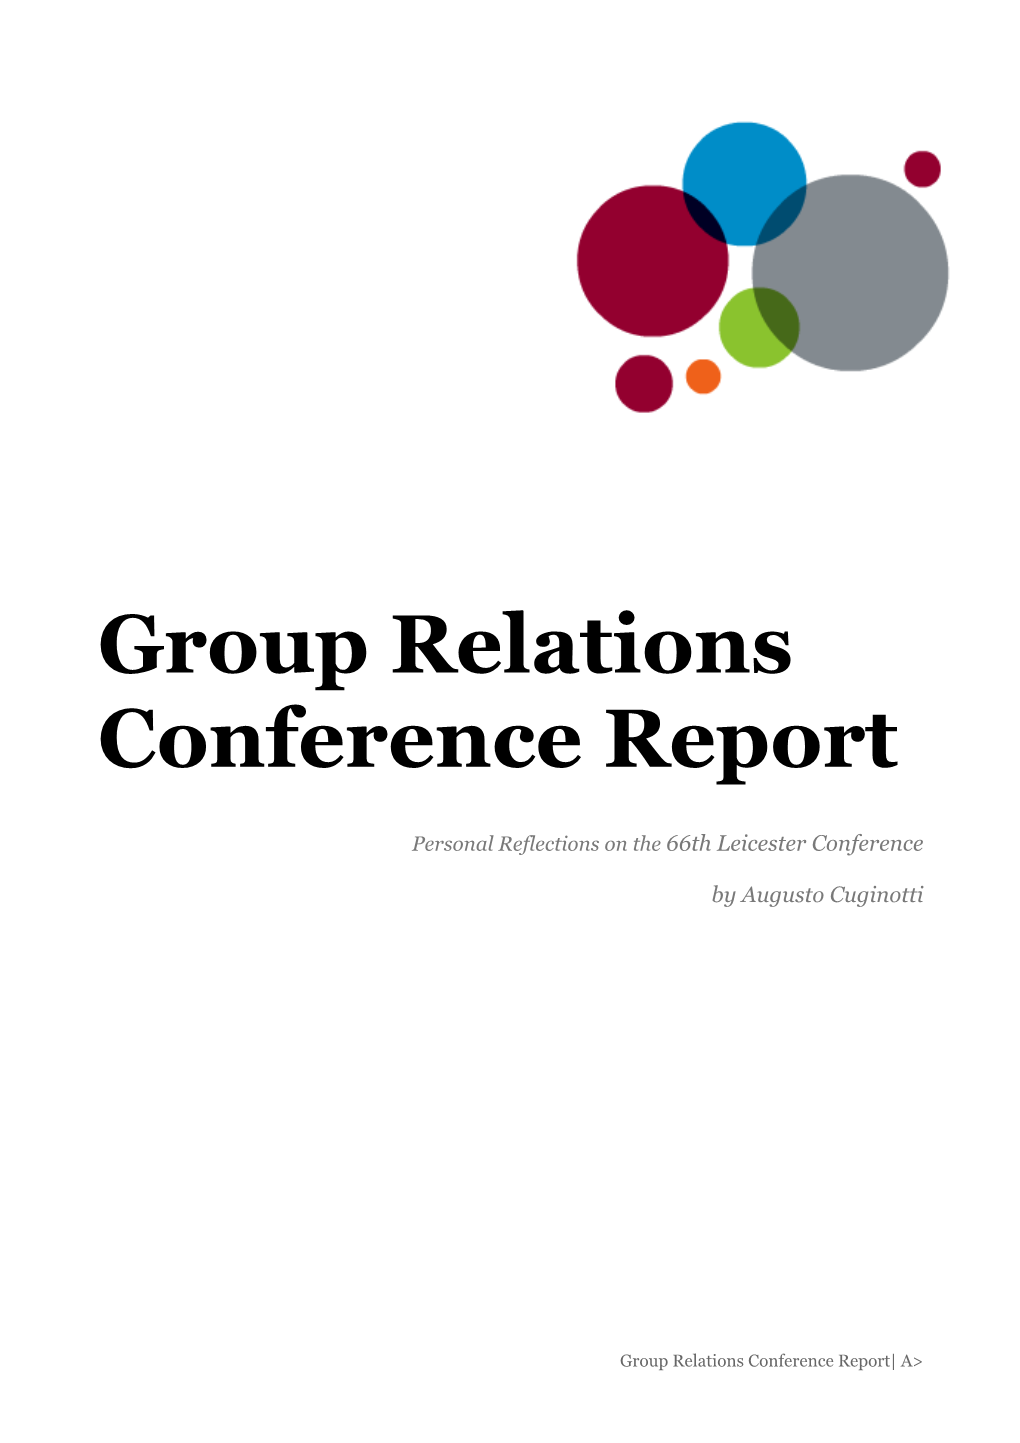 Group Relations Conference Report